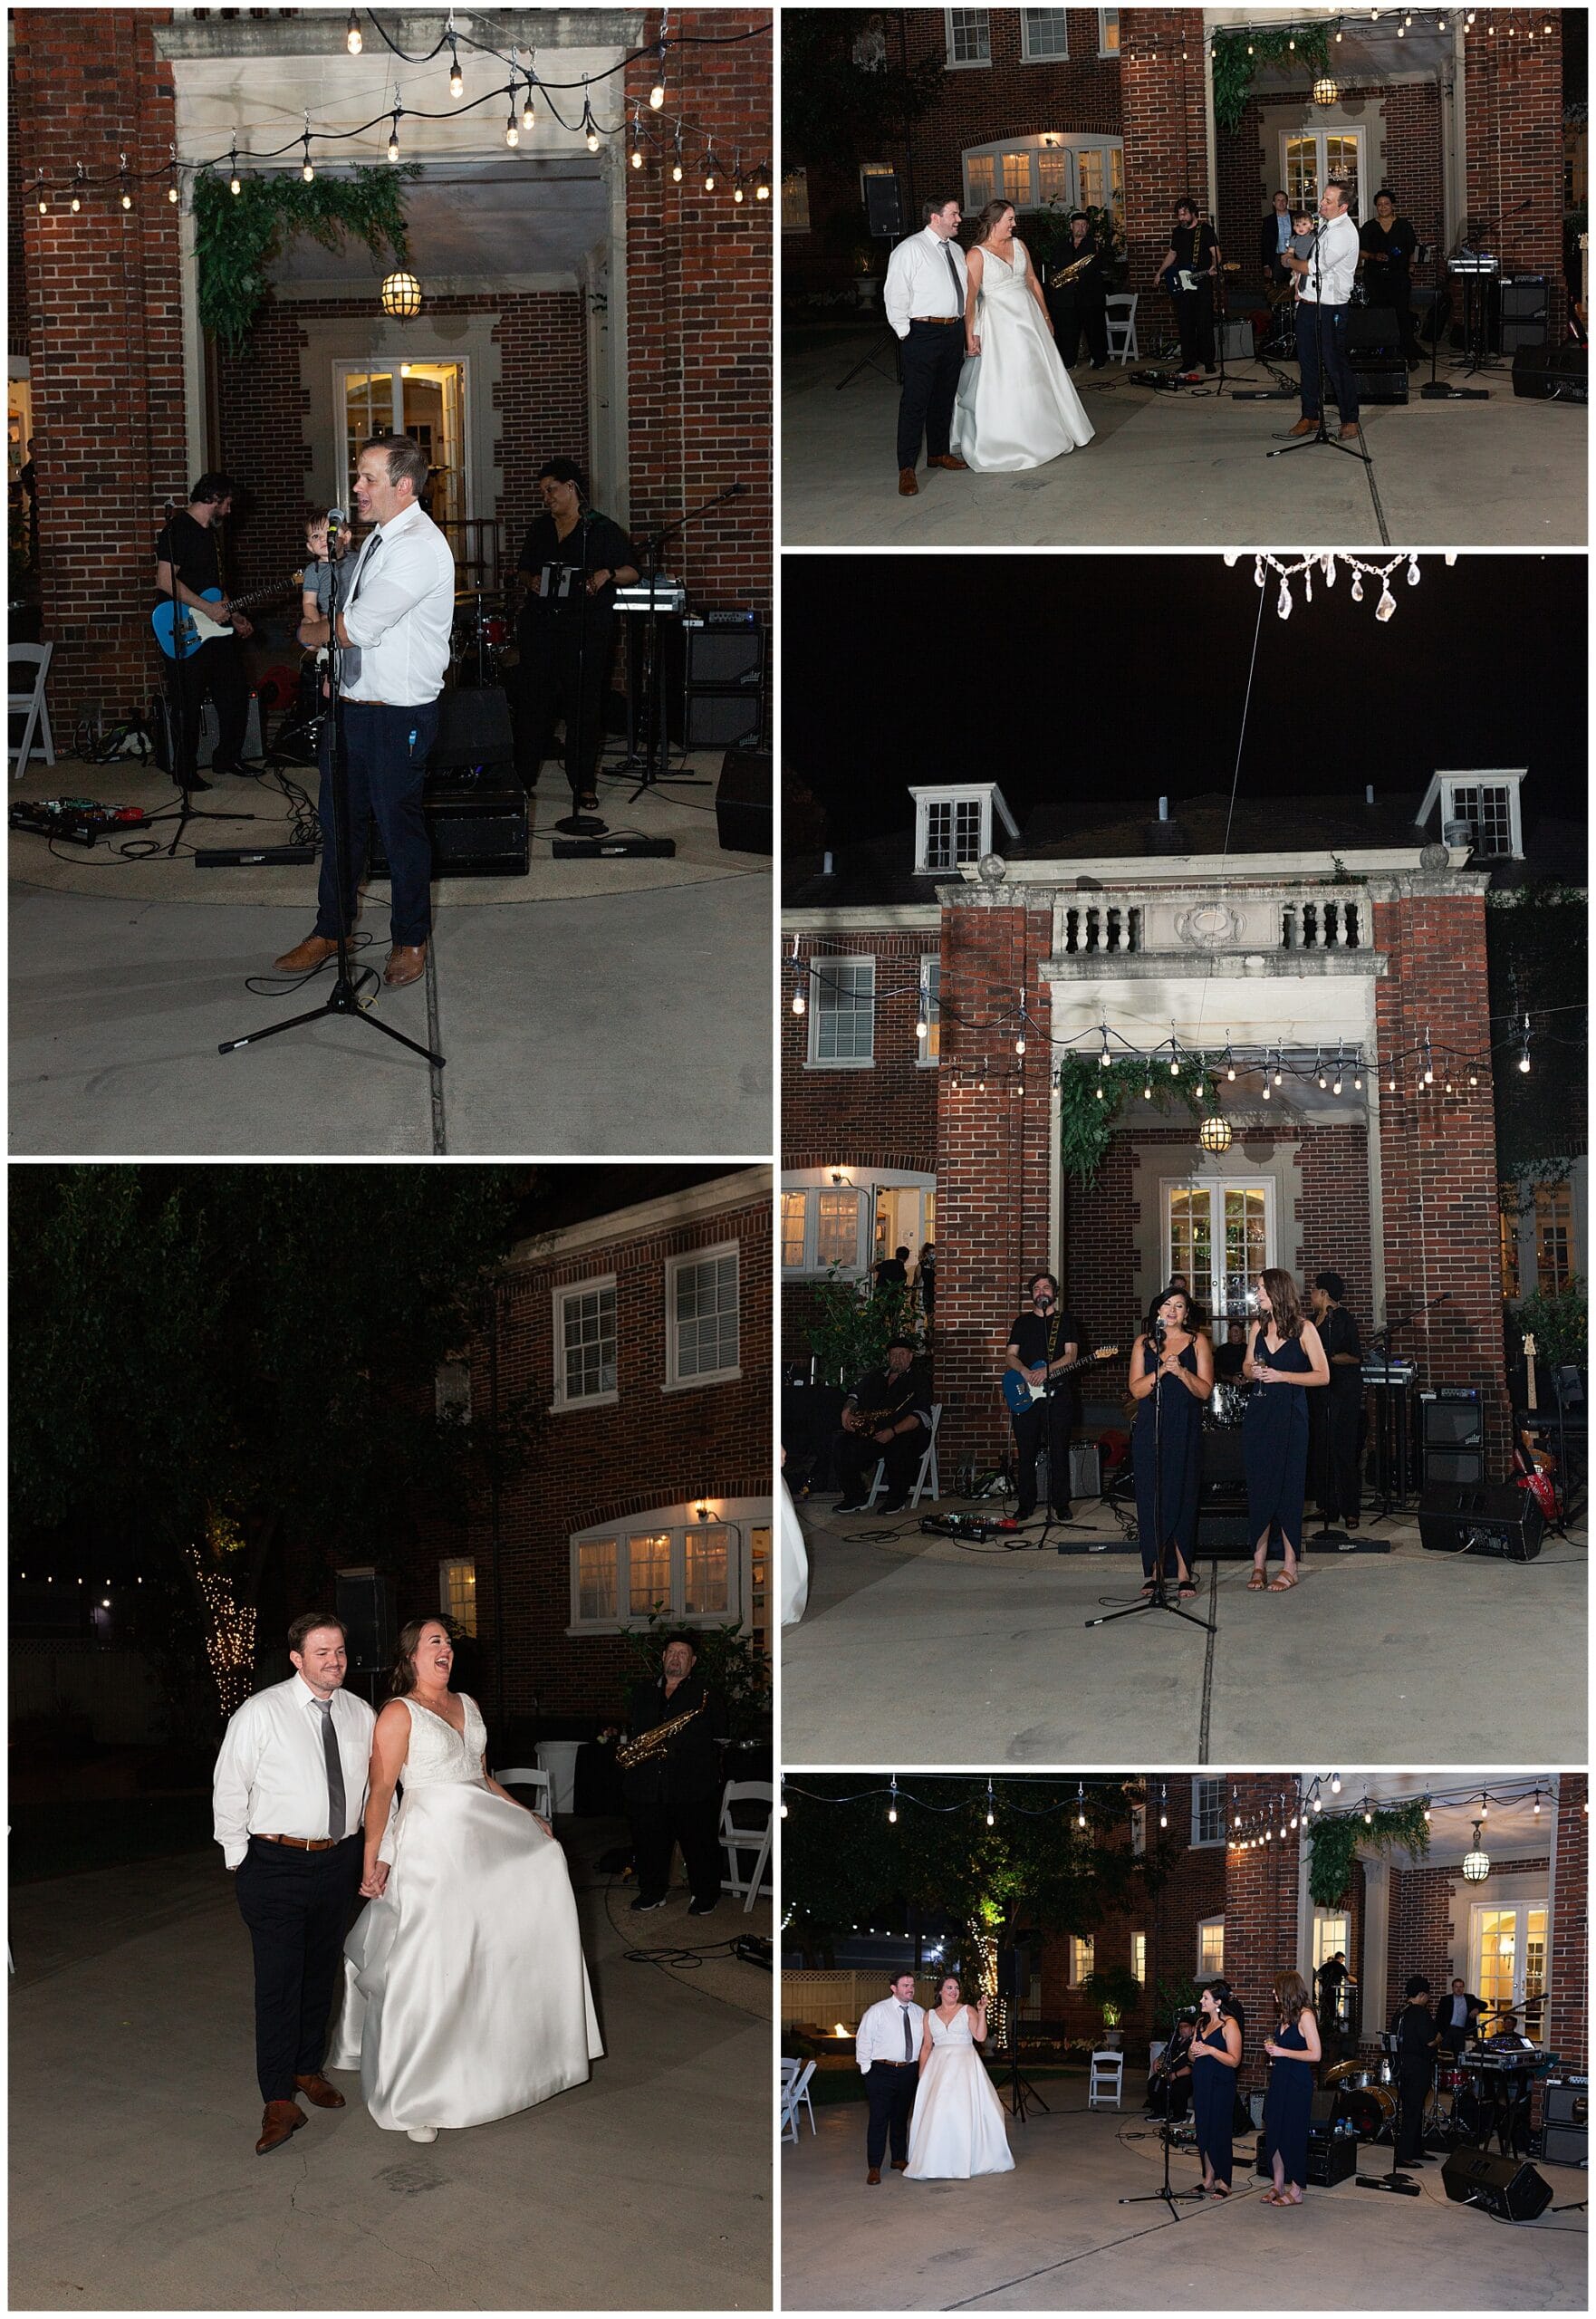 wedding speeches by wedding party to bride and groom at Astin Mansion in Bryan Texas by Swish and Click Photography